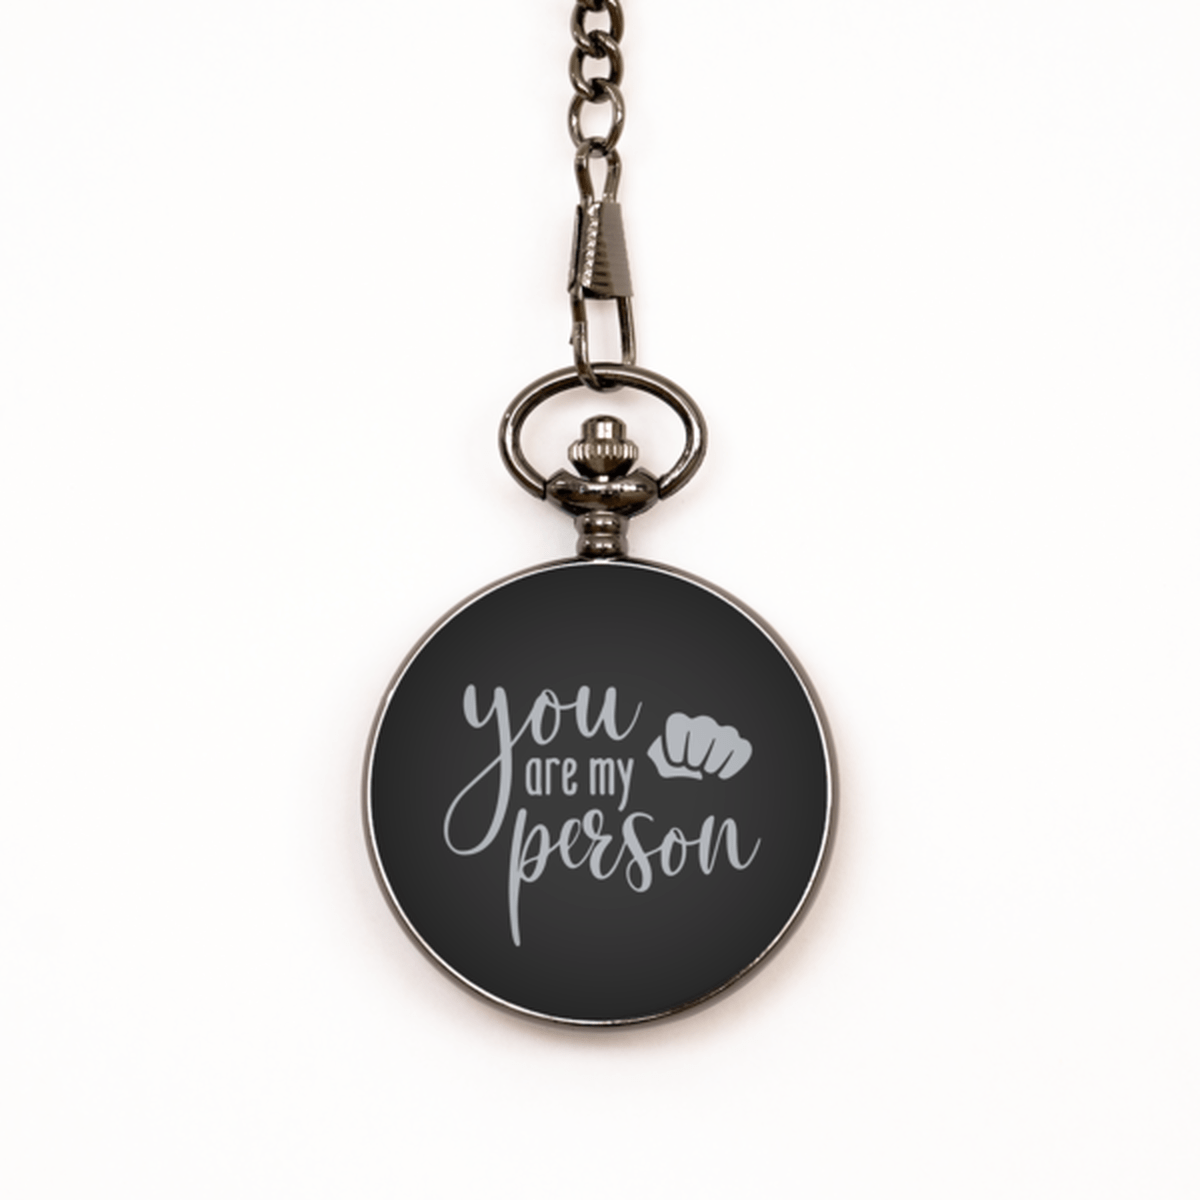 You Are My Person - Engraved Black Pocket Watch - Unique Gift for Husband, Boyfriend, Fiance, Brother, Partner, Best Friend